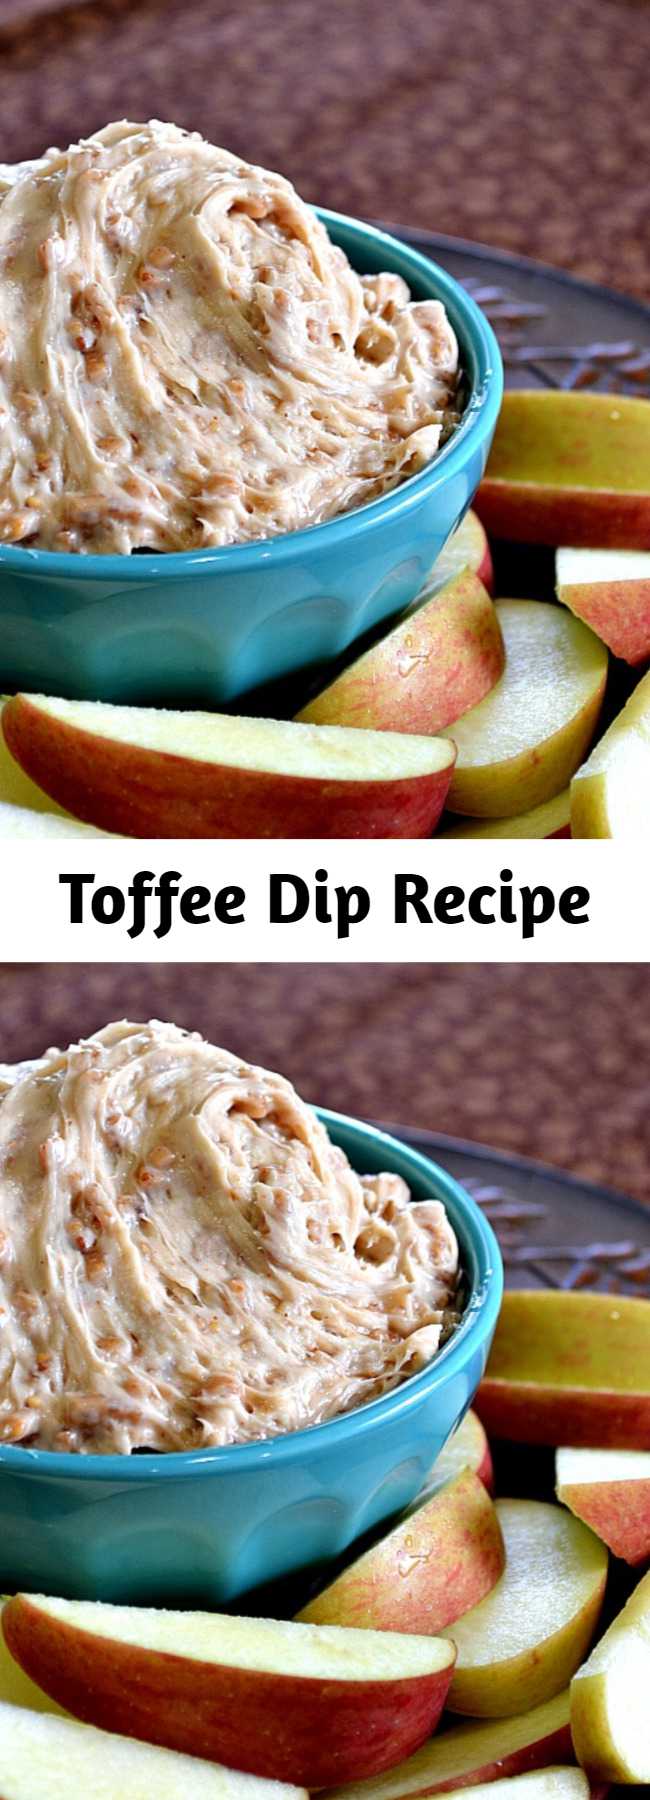 Toffee Dip Recipe - If your guests love caramel apples then they will LOVE this Toffee Dip! Serve this dip with apple slices. Tastes like a caramel apple without the chewy sticky mess.